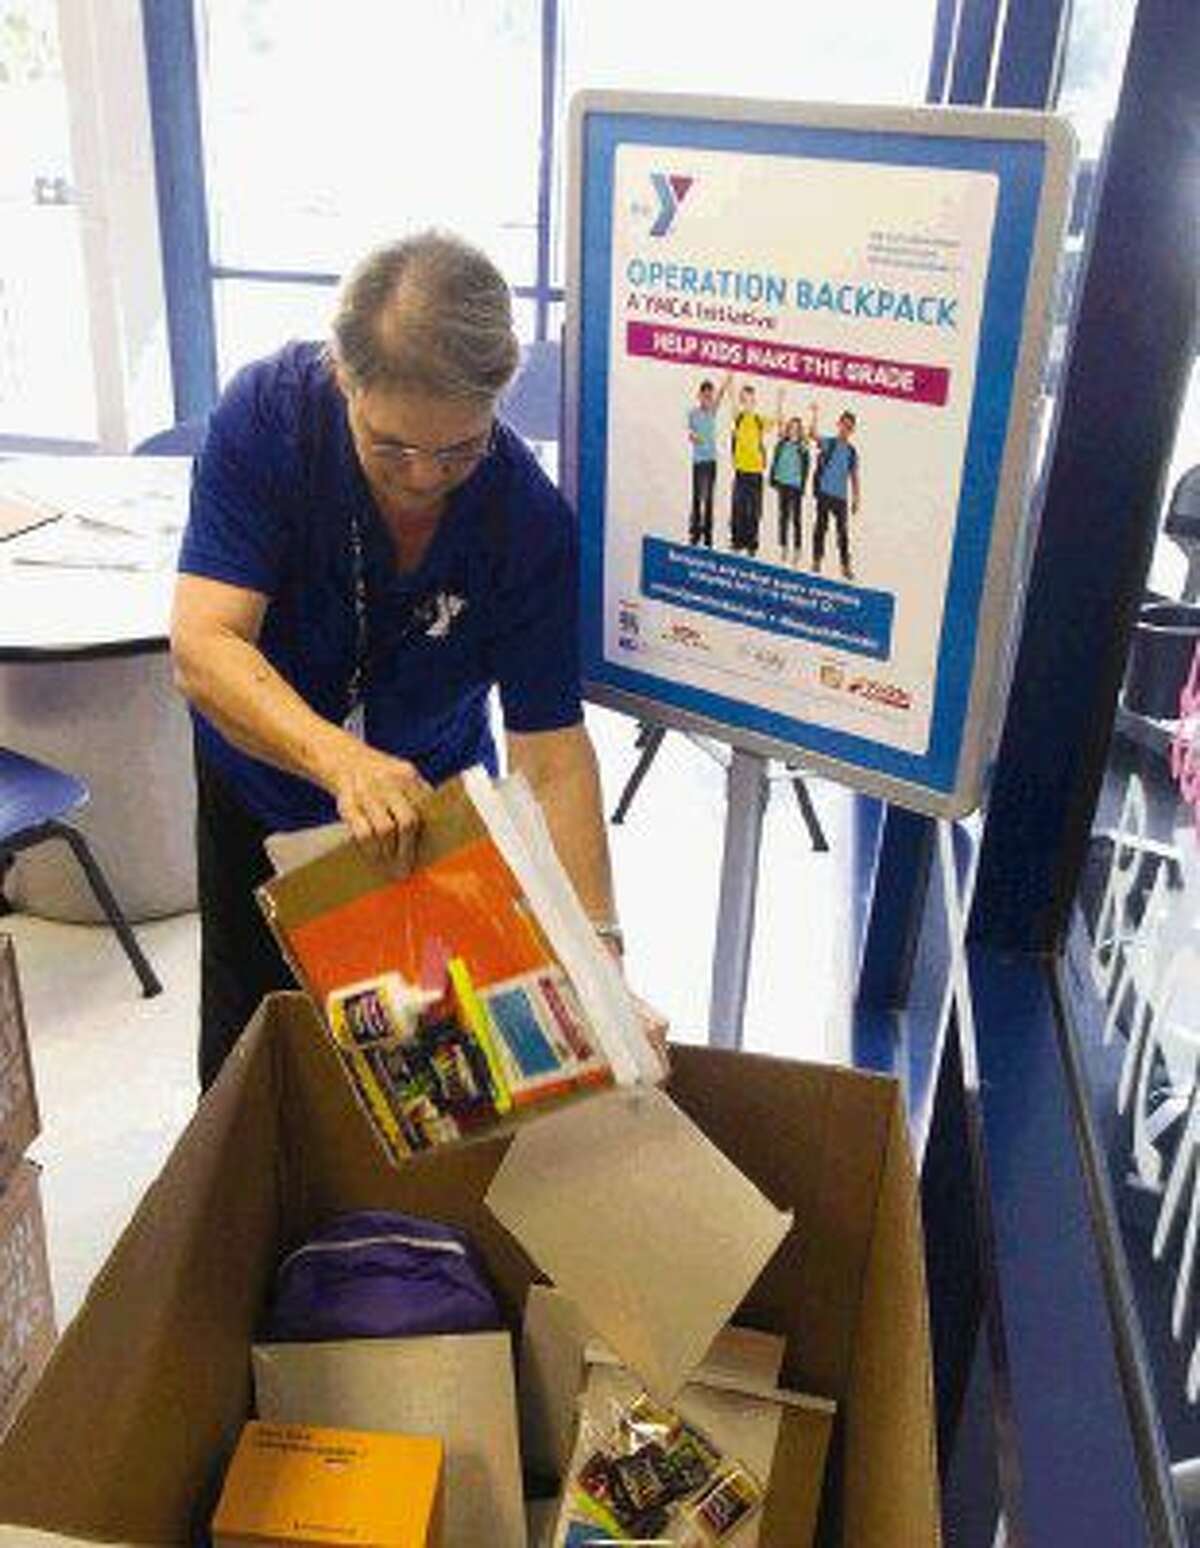 Terri Walters loads school supplies into a bin in support of Operation Backpack at the Conroe Family YMCA Tuesday in Conroe.